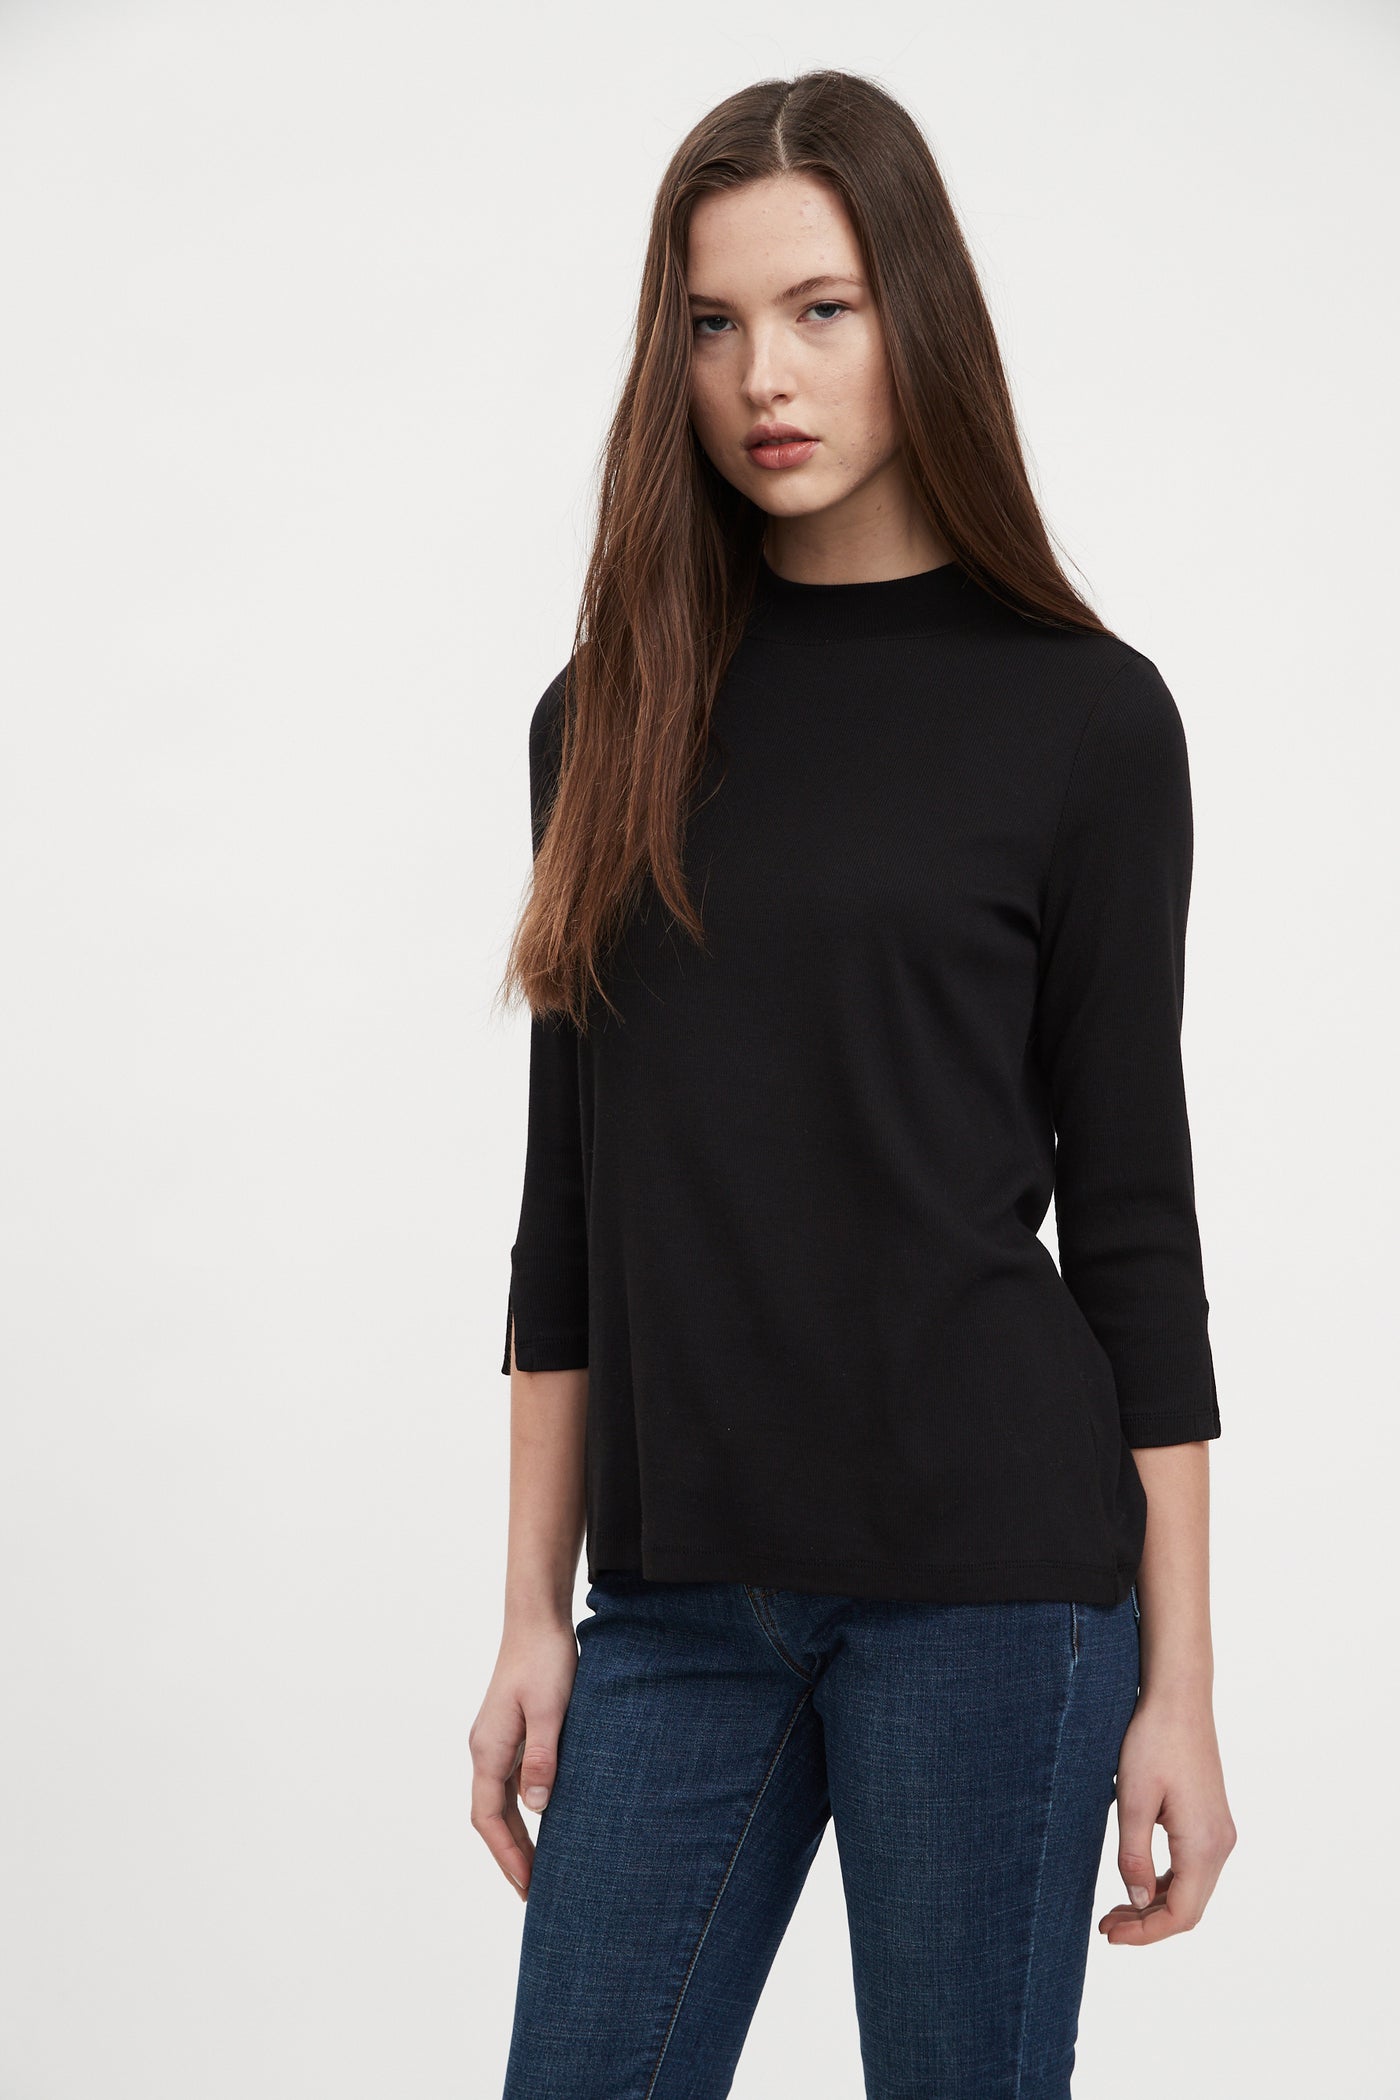 French Dressing Jeans 3/4 Sleeve Mock Neck Top 